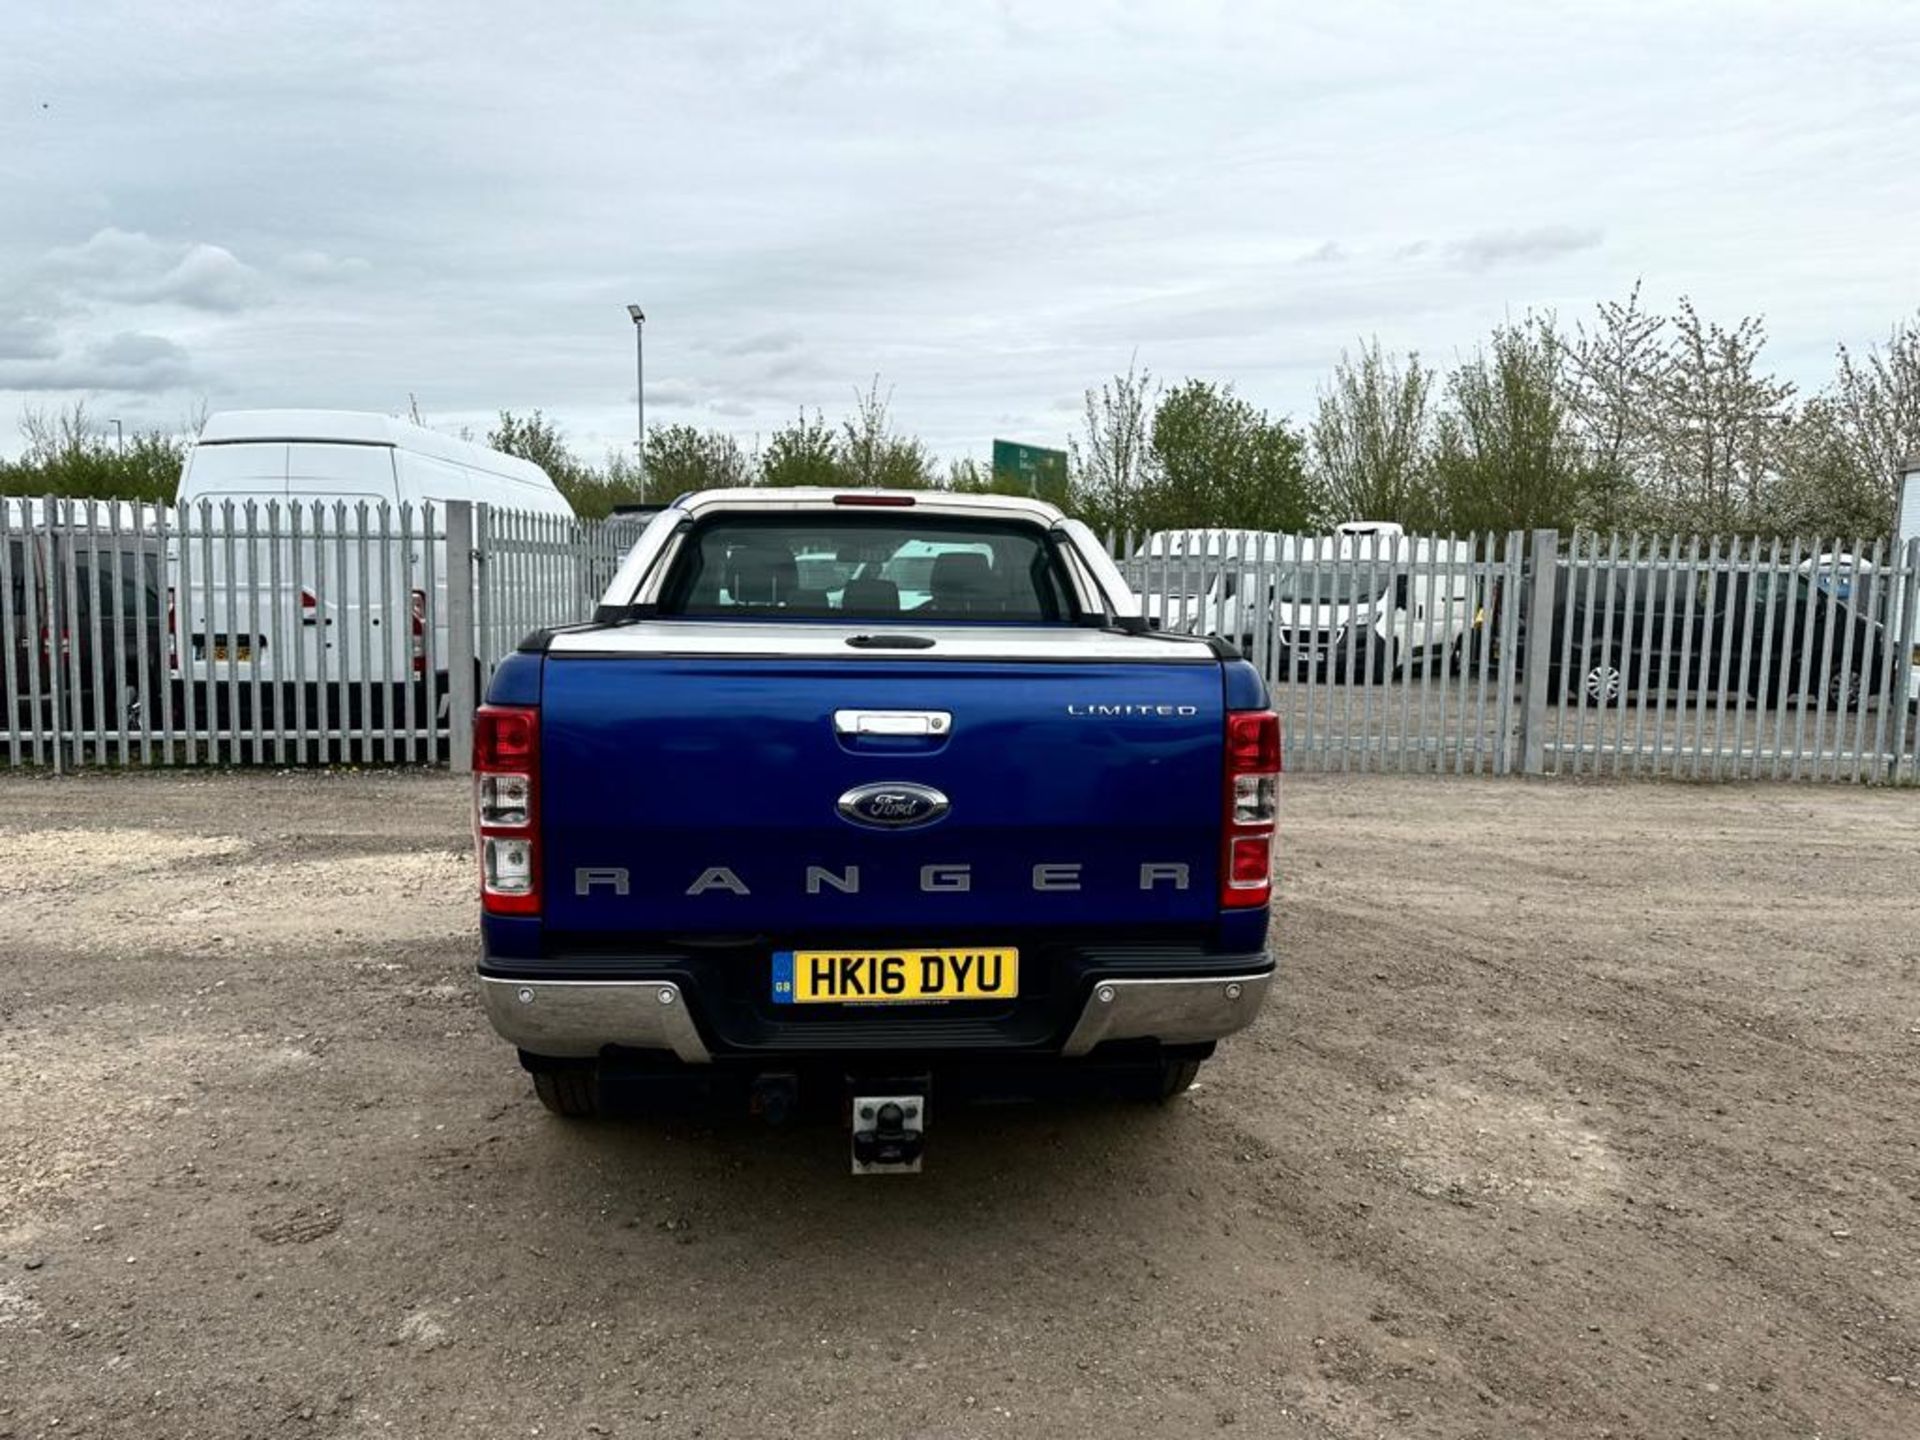 ** ON SALE ** Ford Ranger Limited DCI TDCI 160 4X4 2016 '16 Reg'-Automatic - A/C - -Bluetooth-No Vat - Image 9 of 38